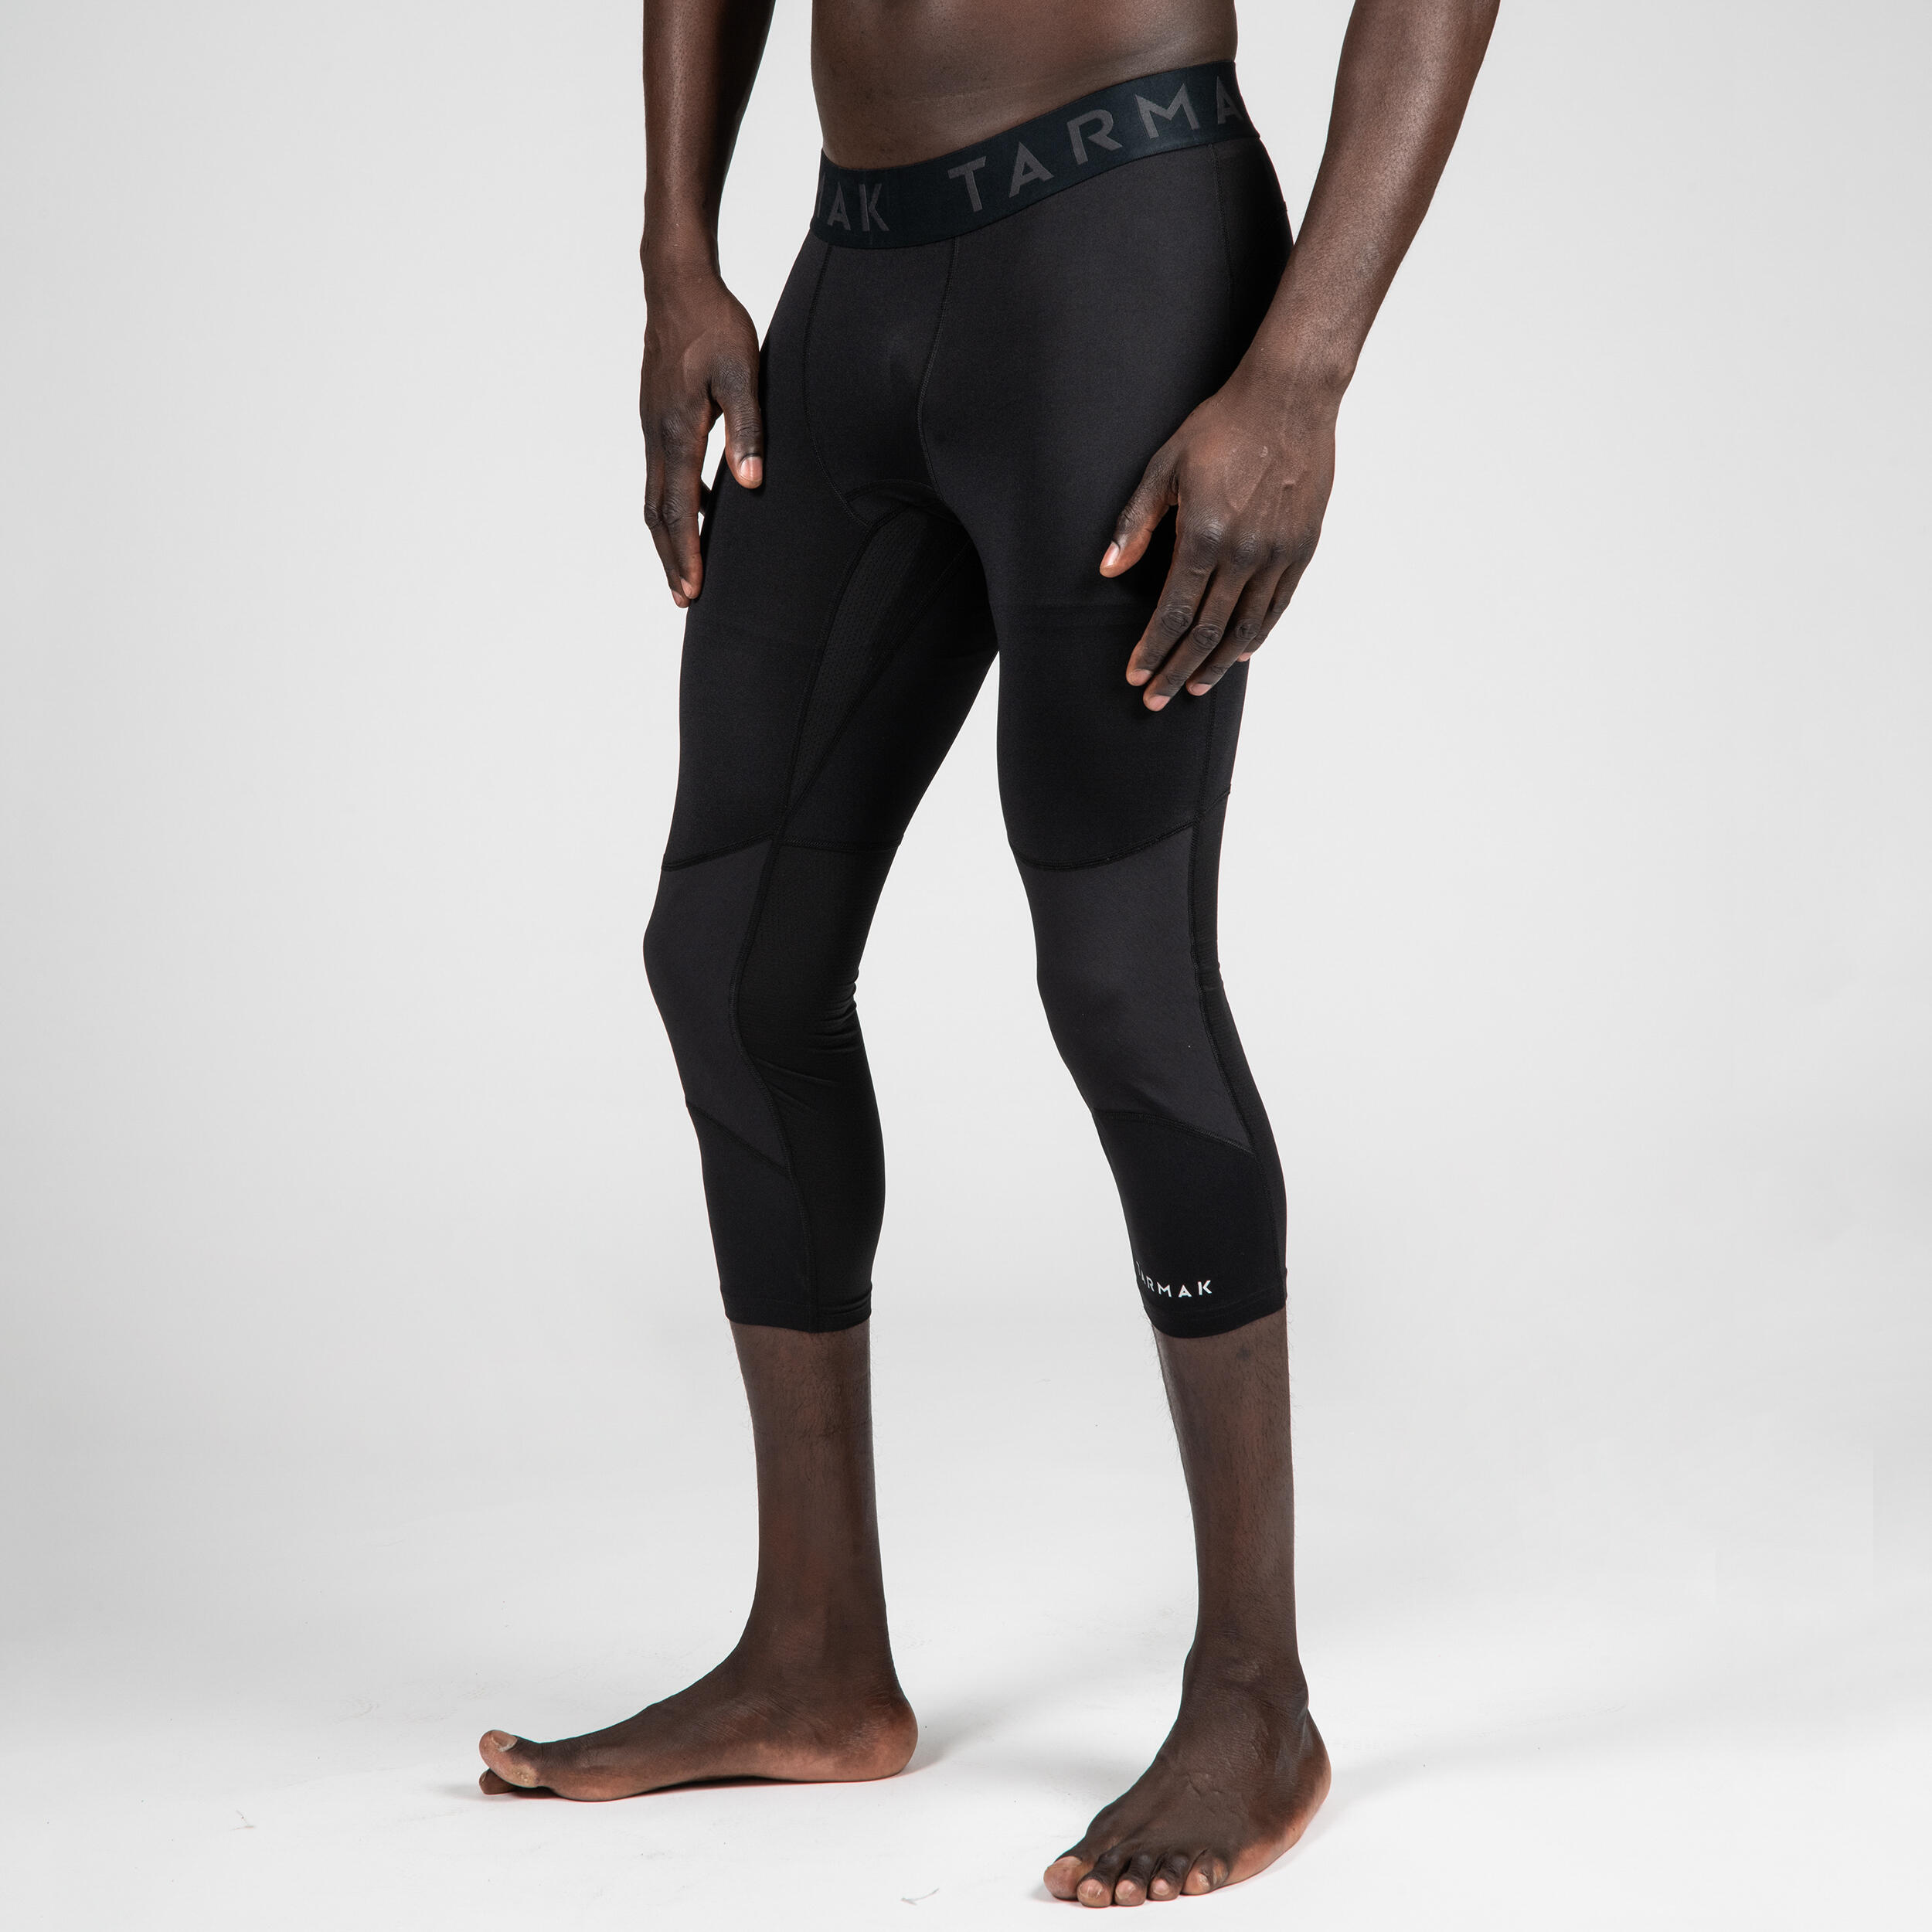 Shop Basketball Short Leggings with great discounts and prices